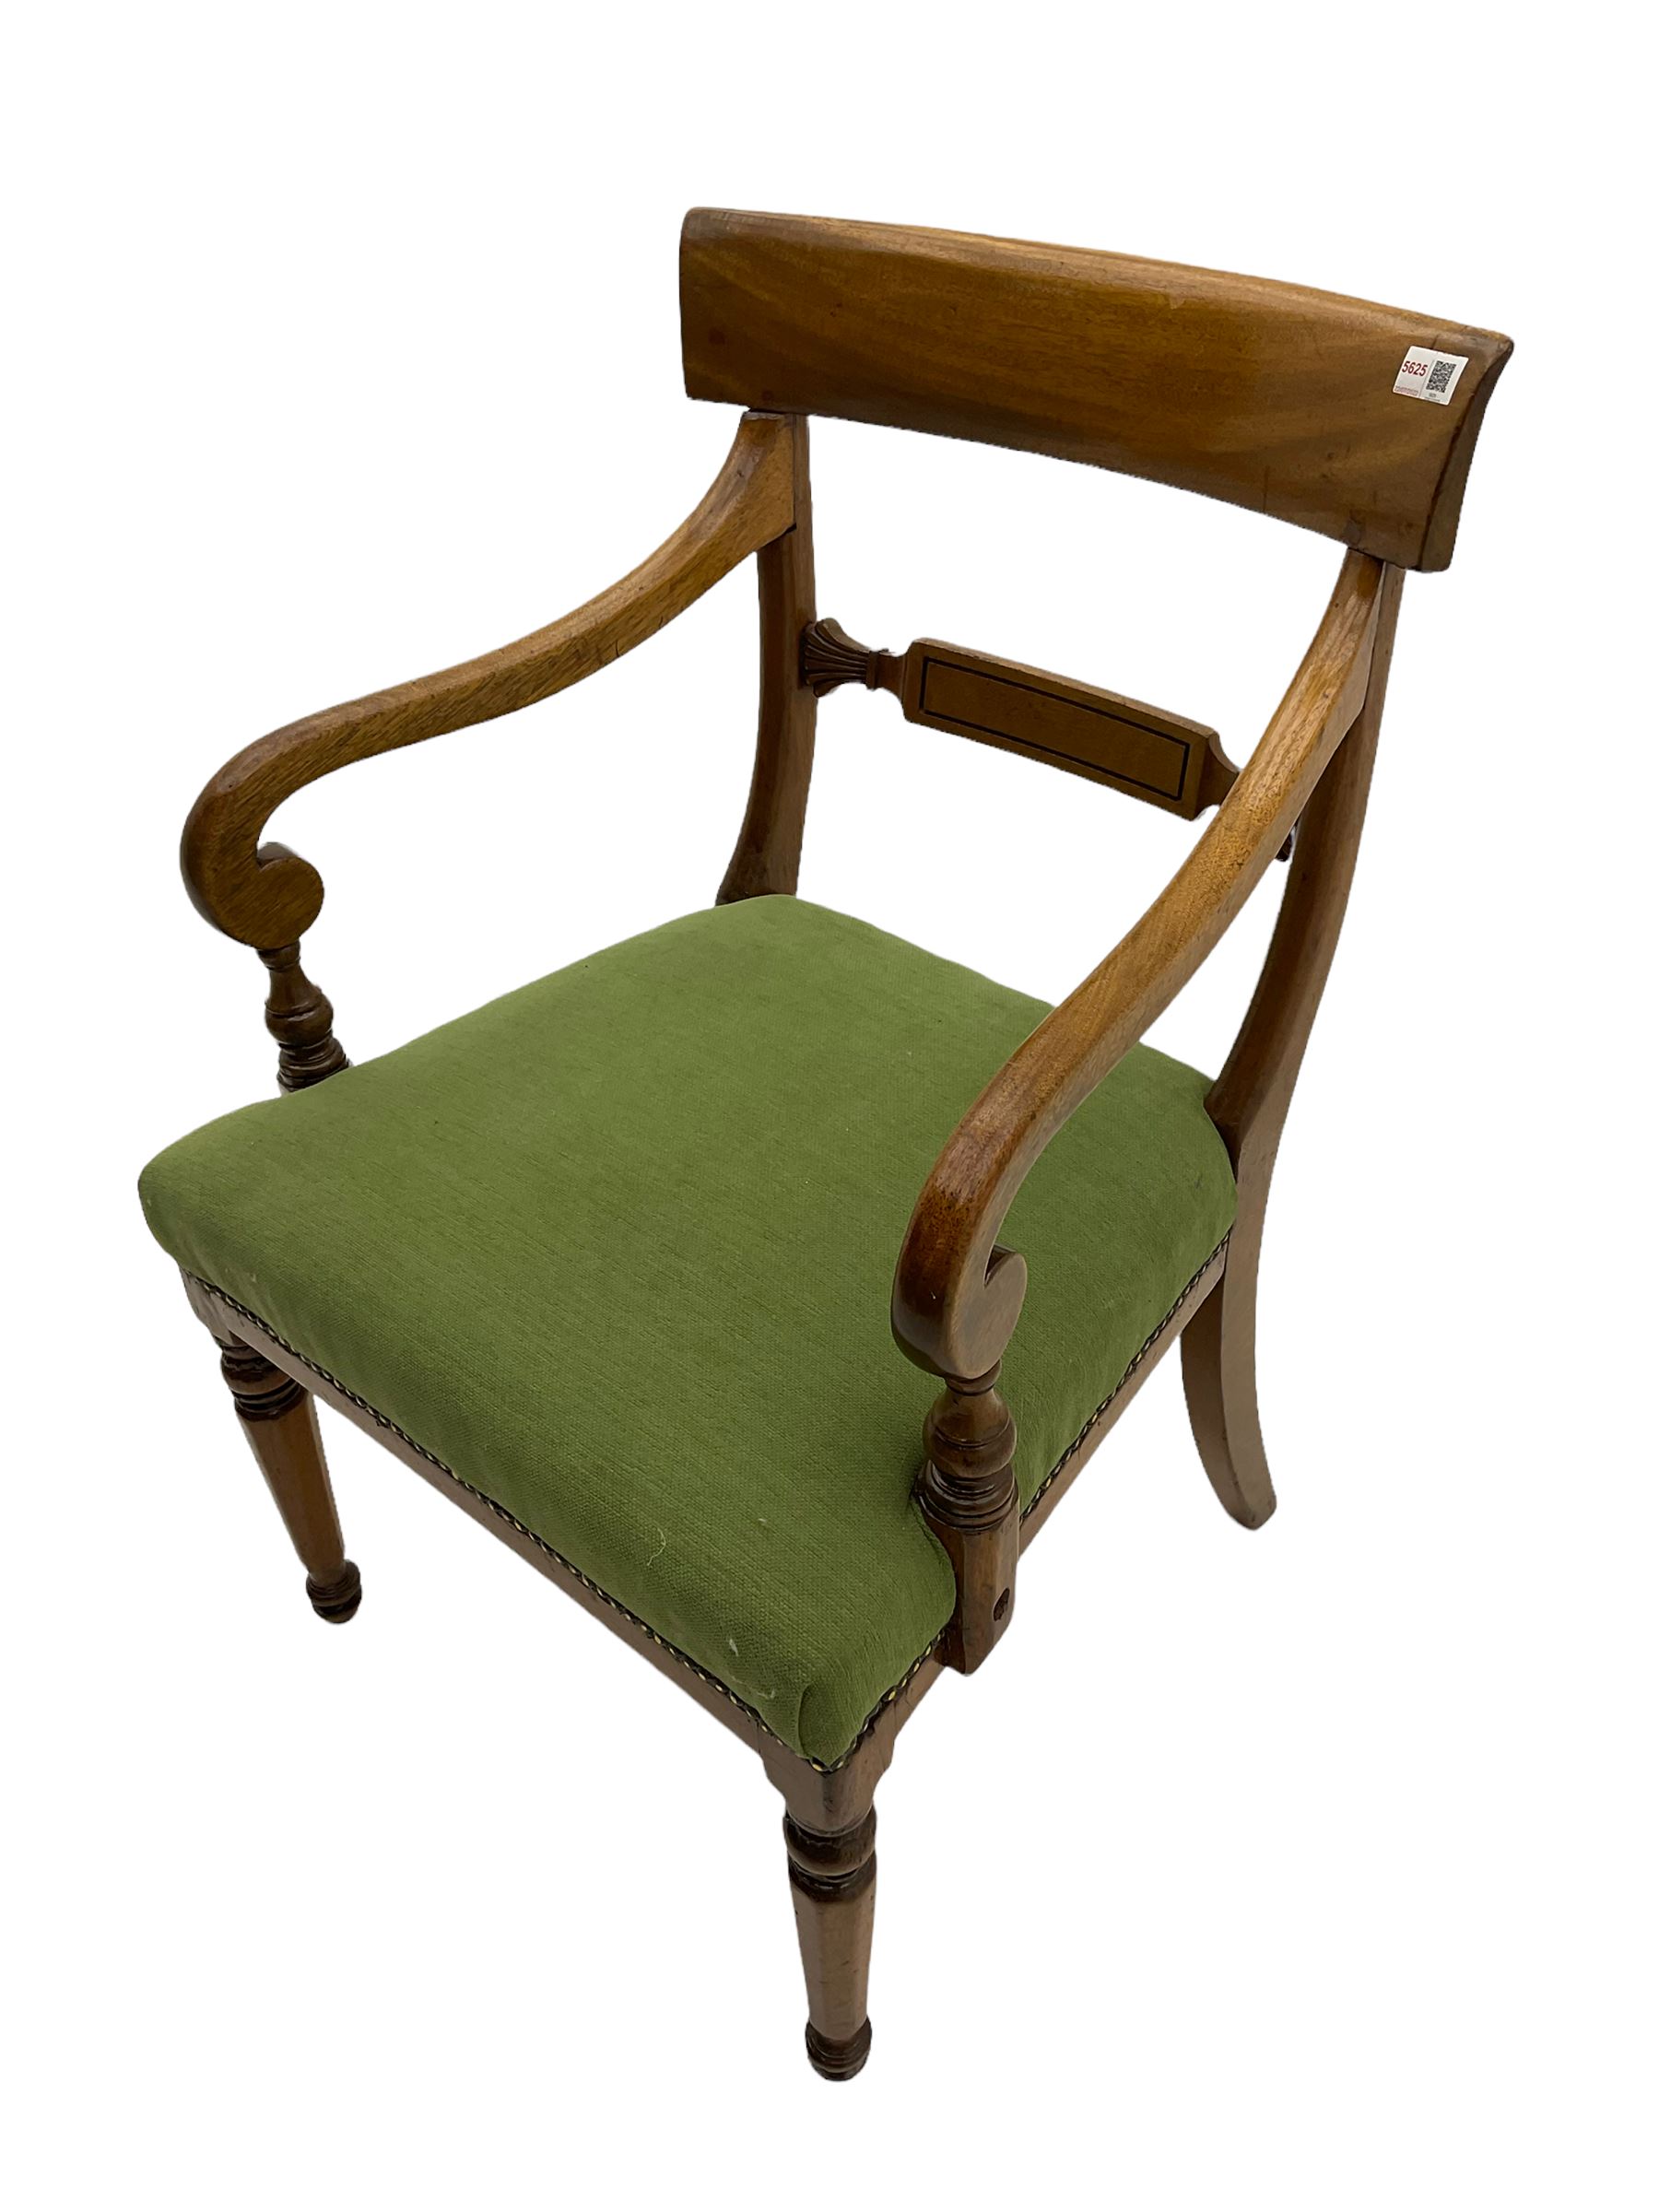 19th century mahogany open elbow chair - Image 2 of 2